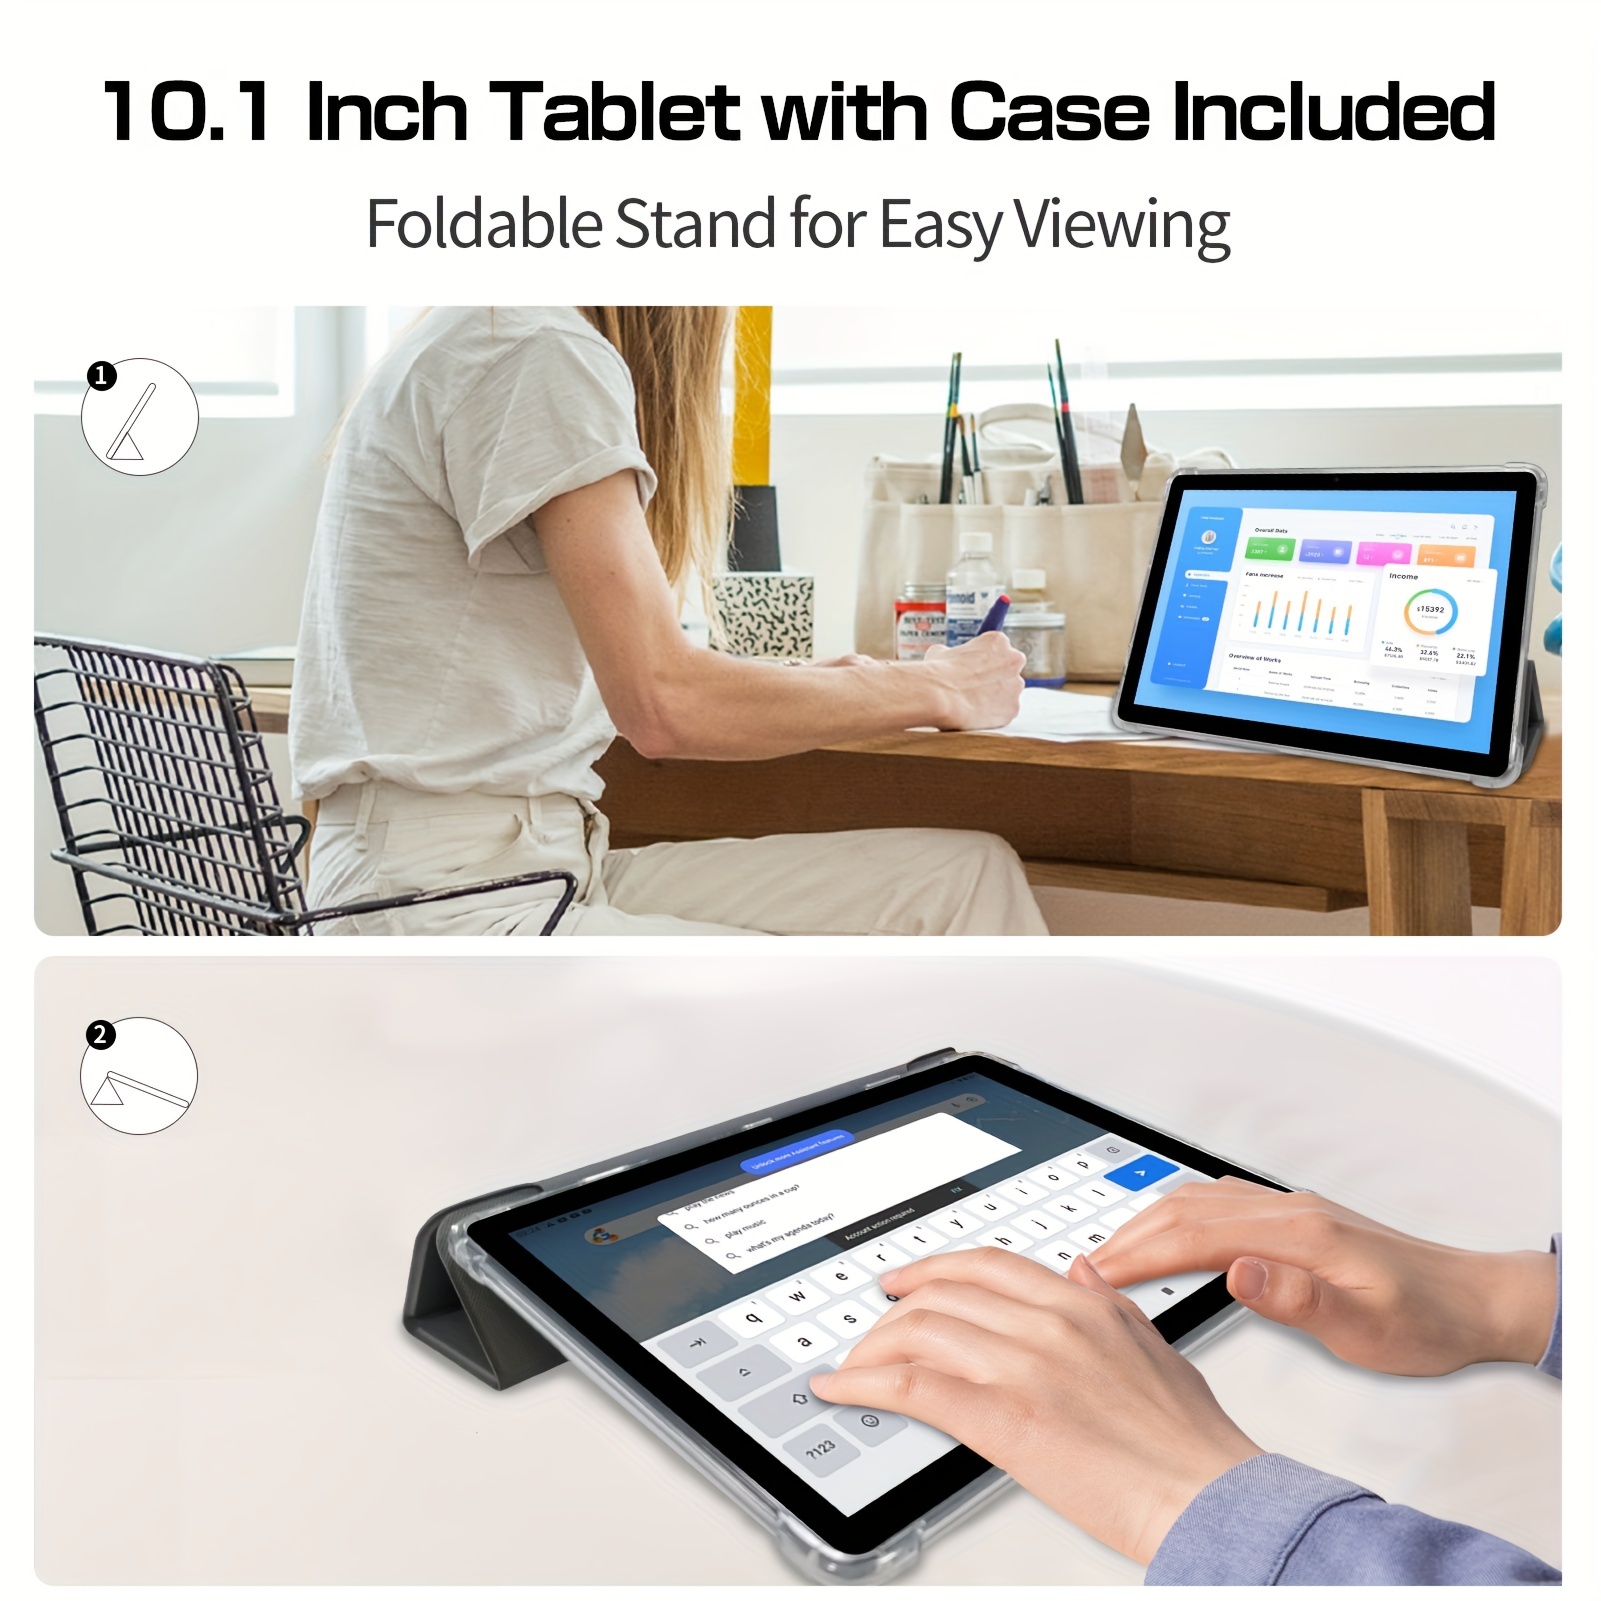  FACETEL Android 13 Tablet 10 inch Octa-Core 2.0 GHz